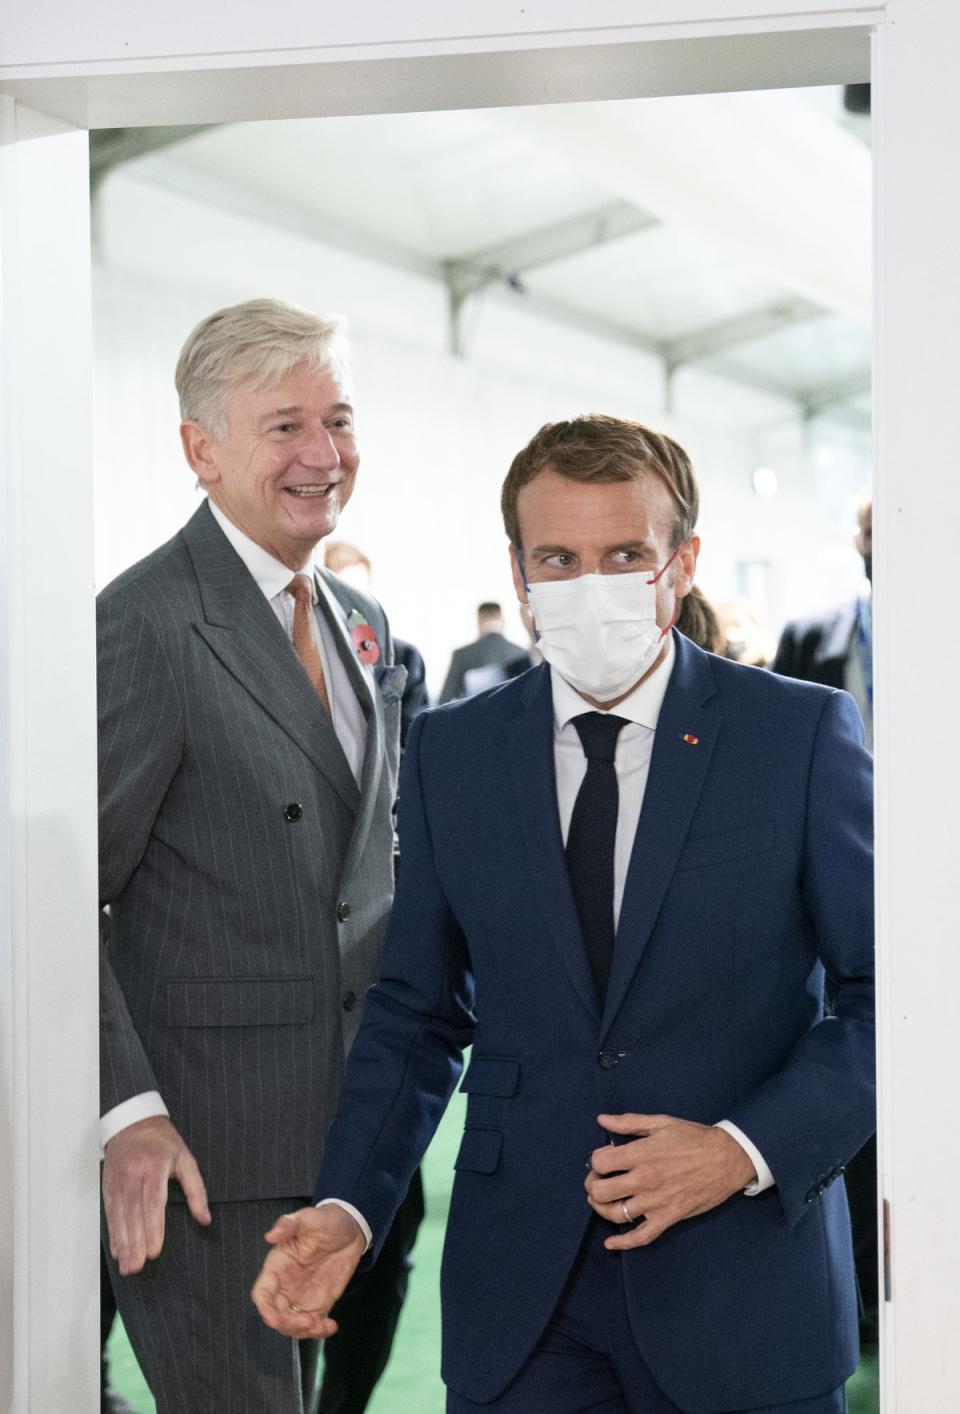 Clive Alderton (left) with the French president Emmanuel Macron at Cop26 in 2021 (Jane Barlow/PA) (PA Wire)